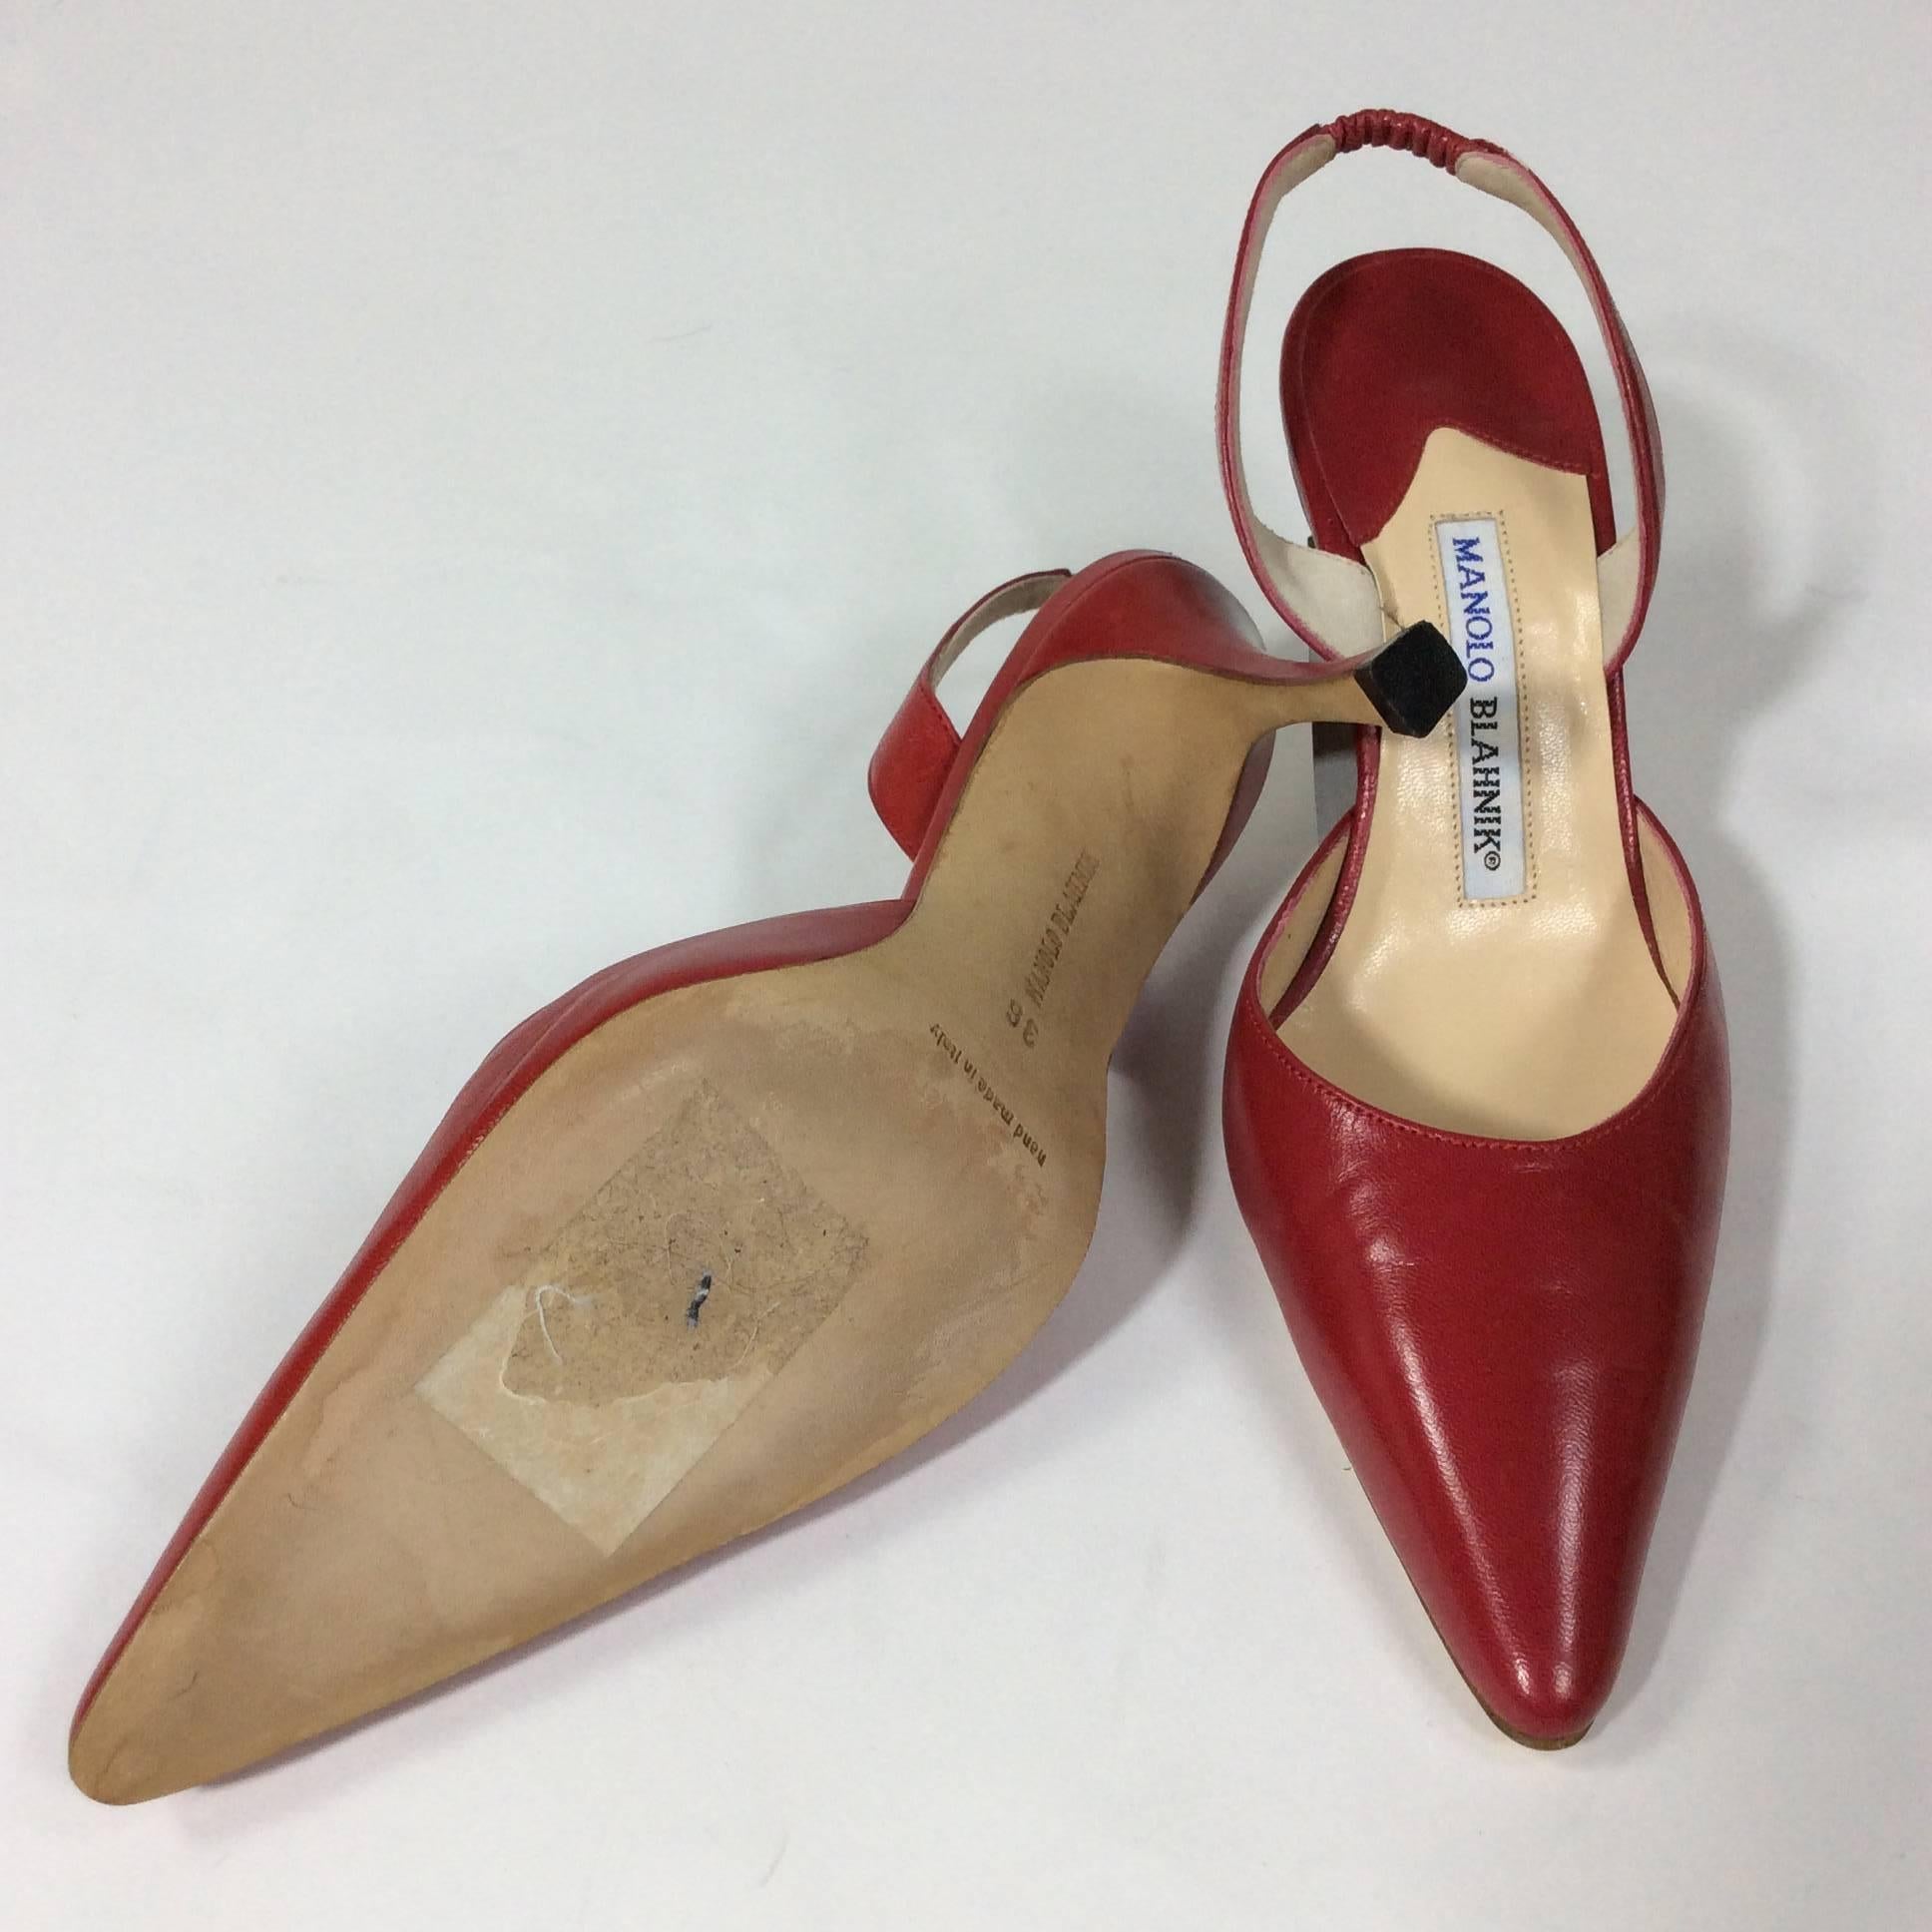 Manolo Blahnik Red Pointed Heels with Heel Strap In Excellent Condition For Sale In Narberth, PA